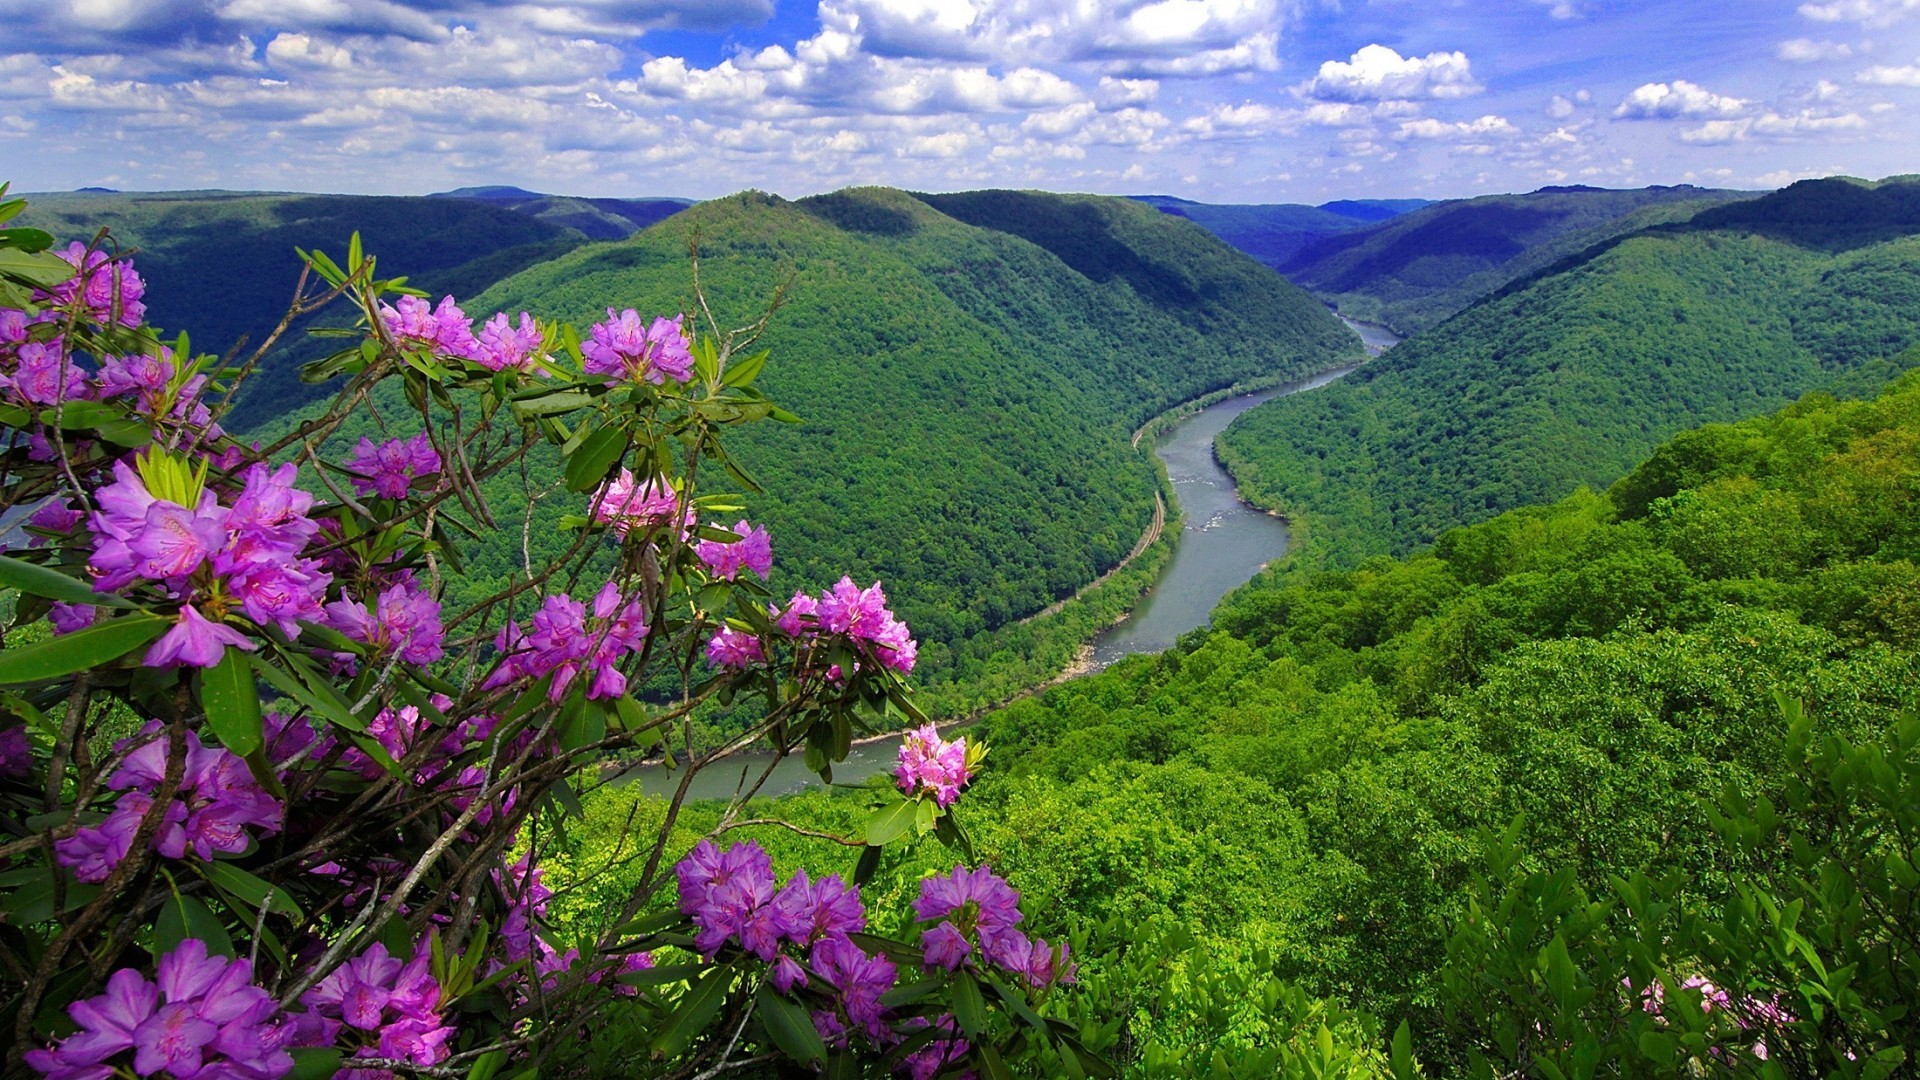 1920x1080 wallpaper Picturesque Kanawha River in the hills of West Virginia USA  